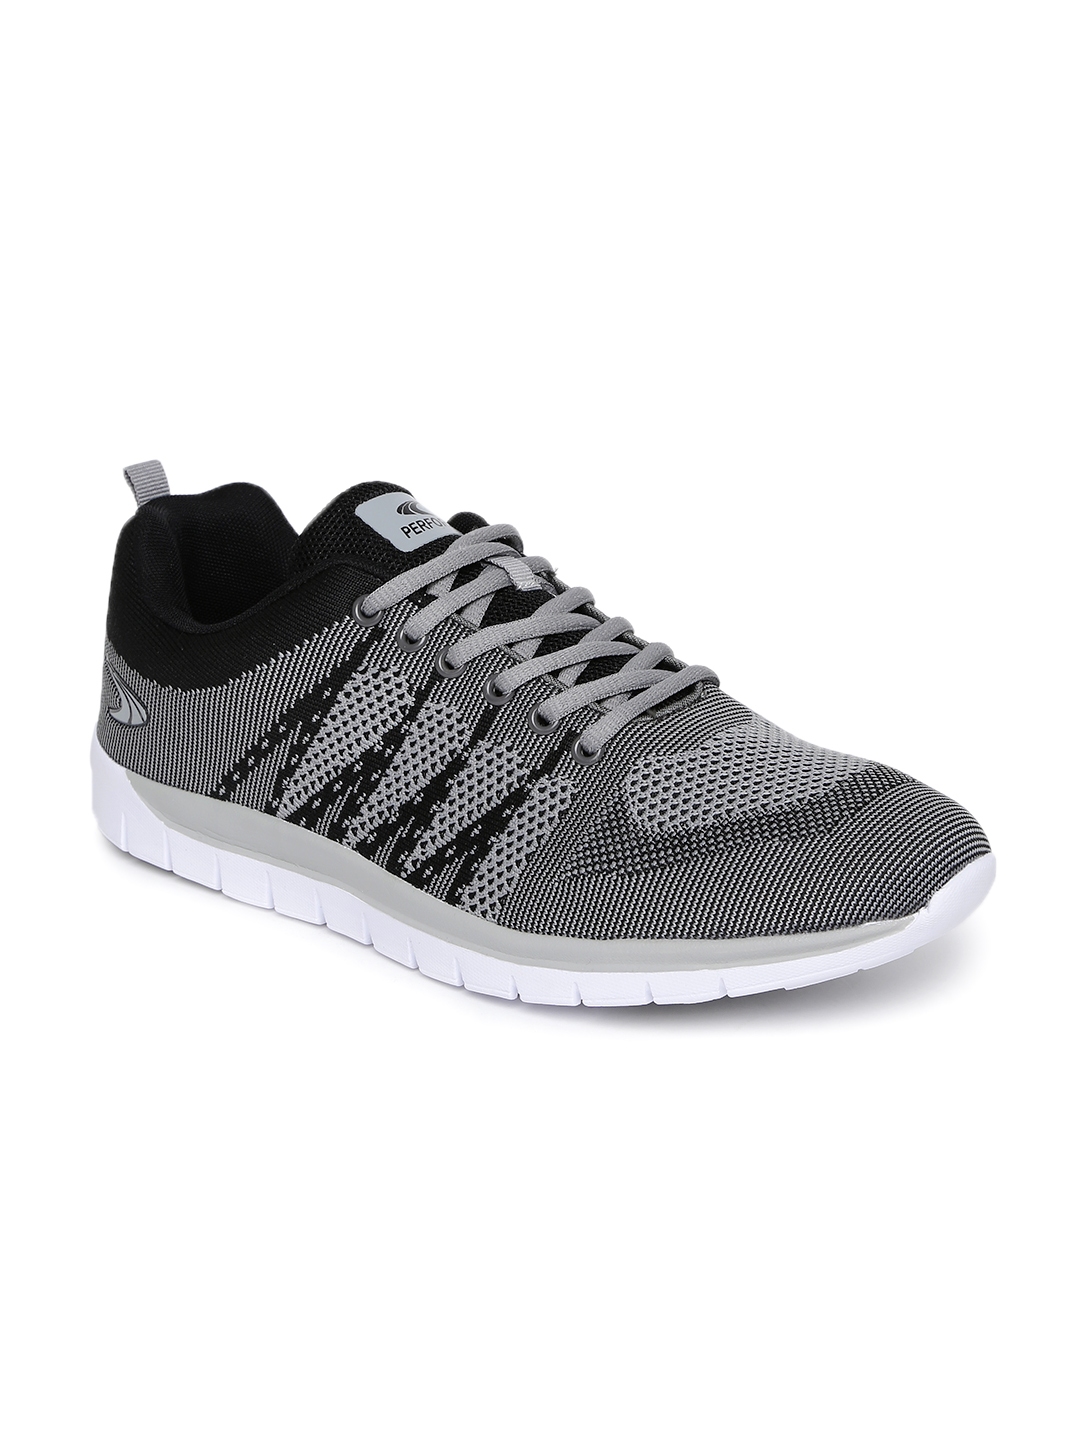 Buy Performax Men Grey PF03 Running Shoes - Sports Shoes for Men ...